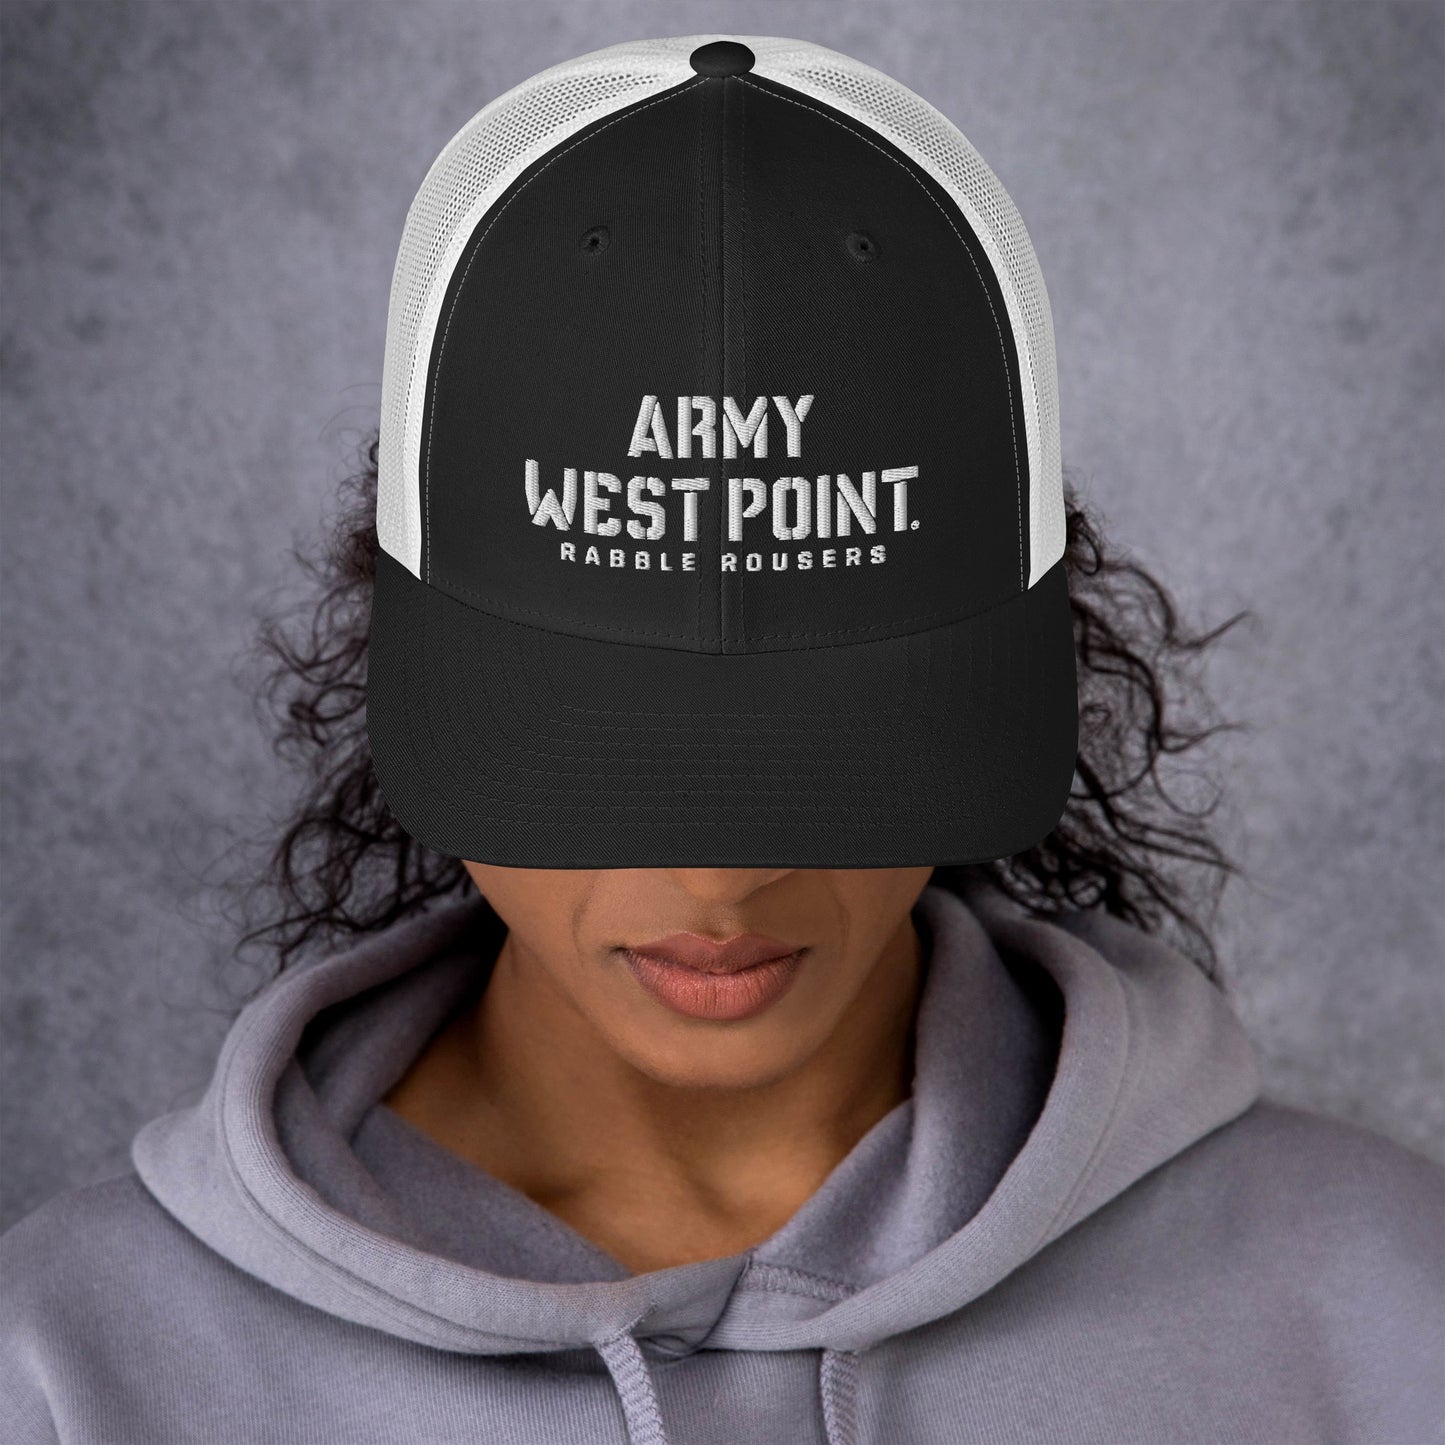 Army West Point Rabble Rousers Trucker Cap (White Thread)